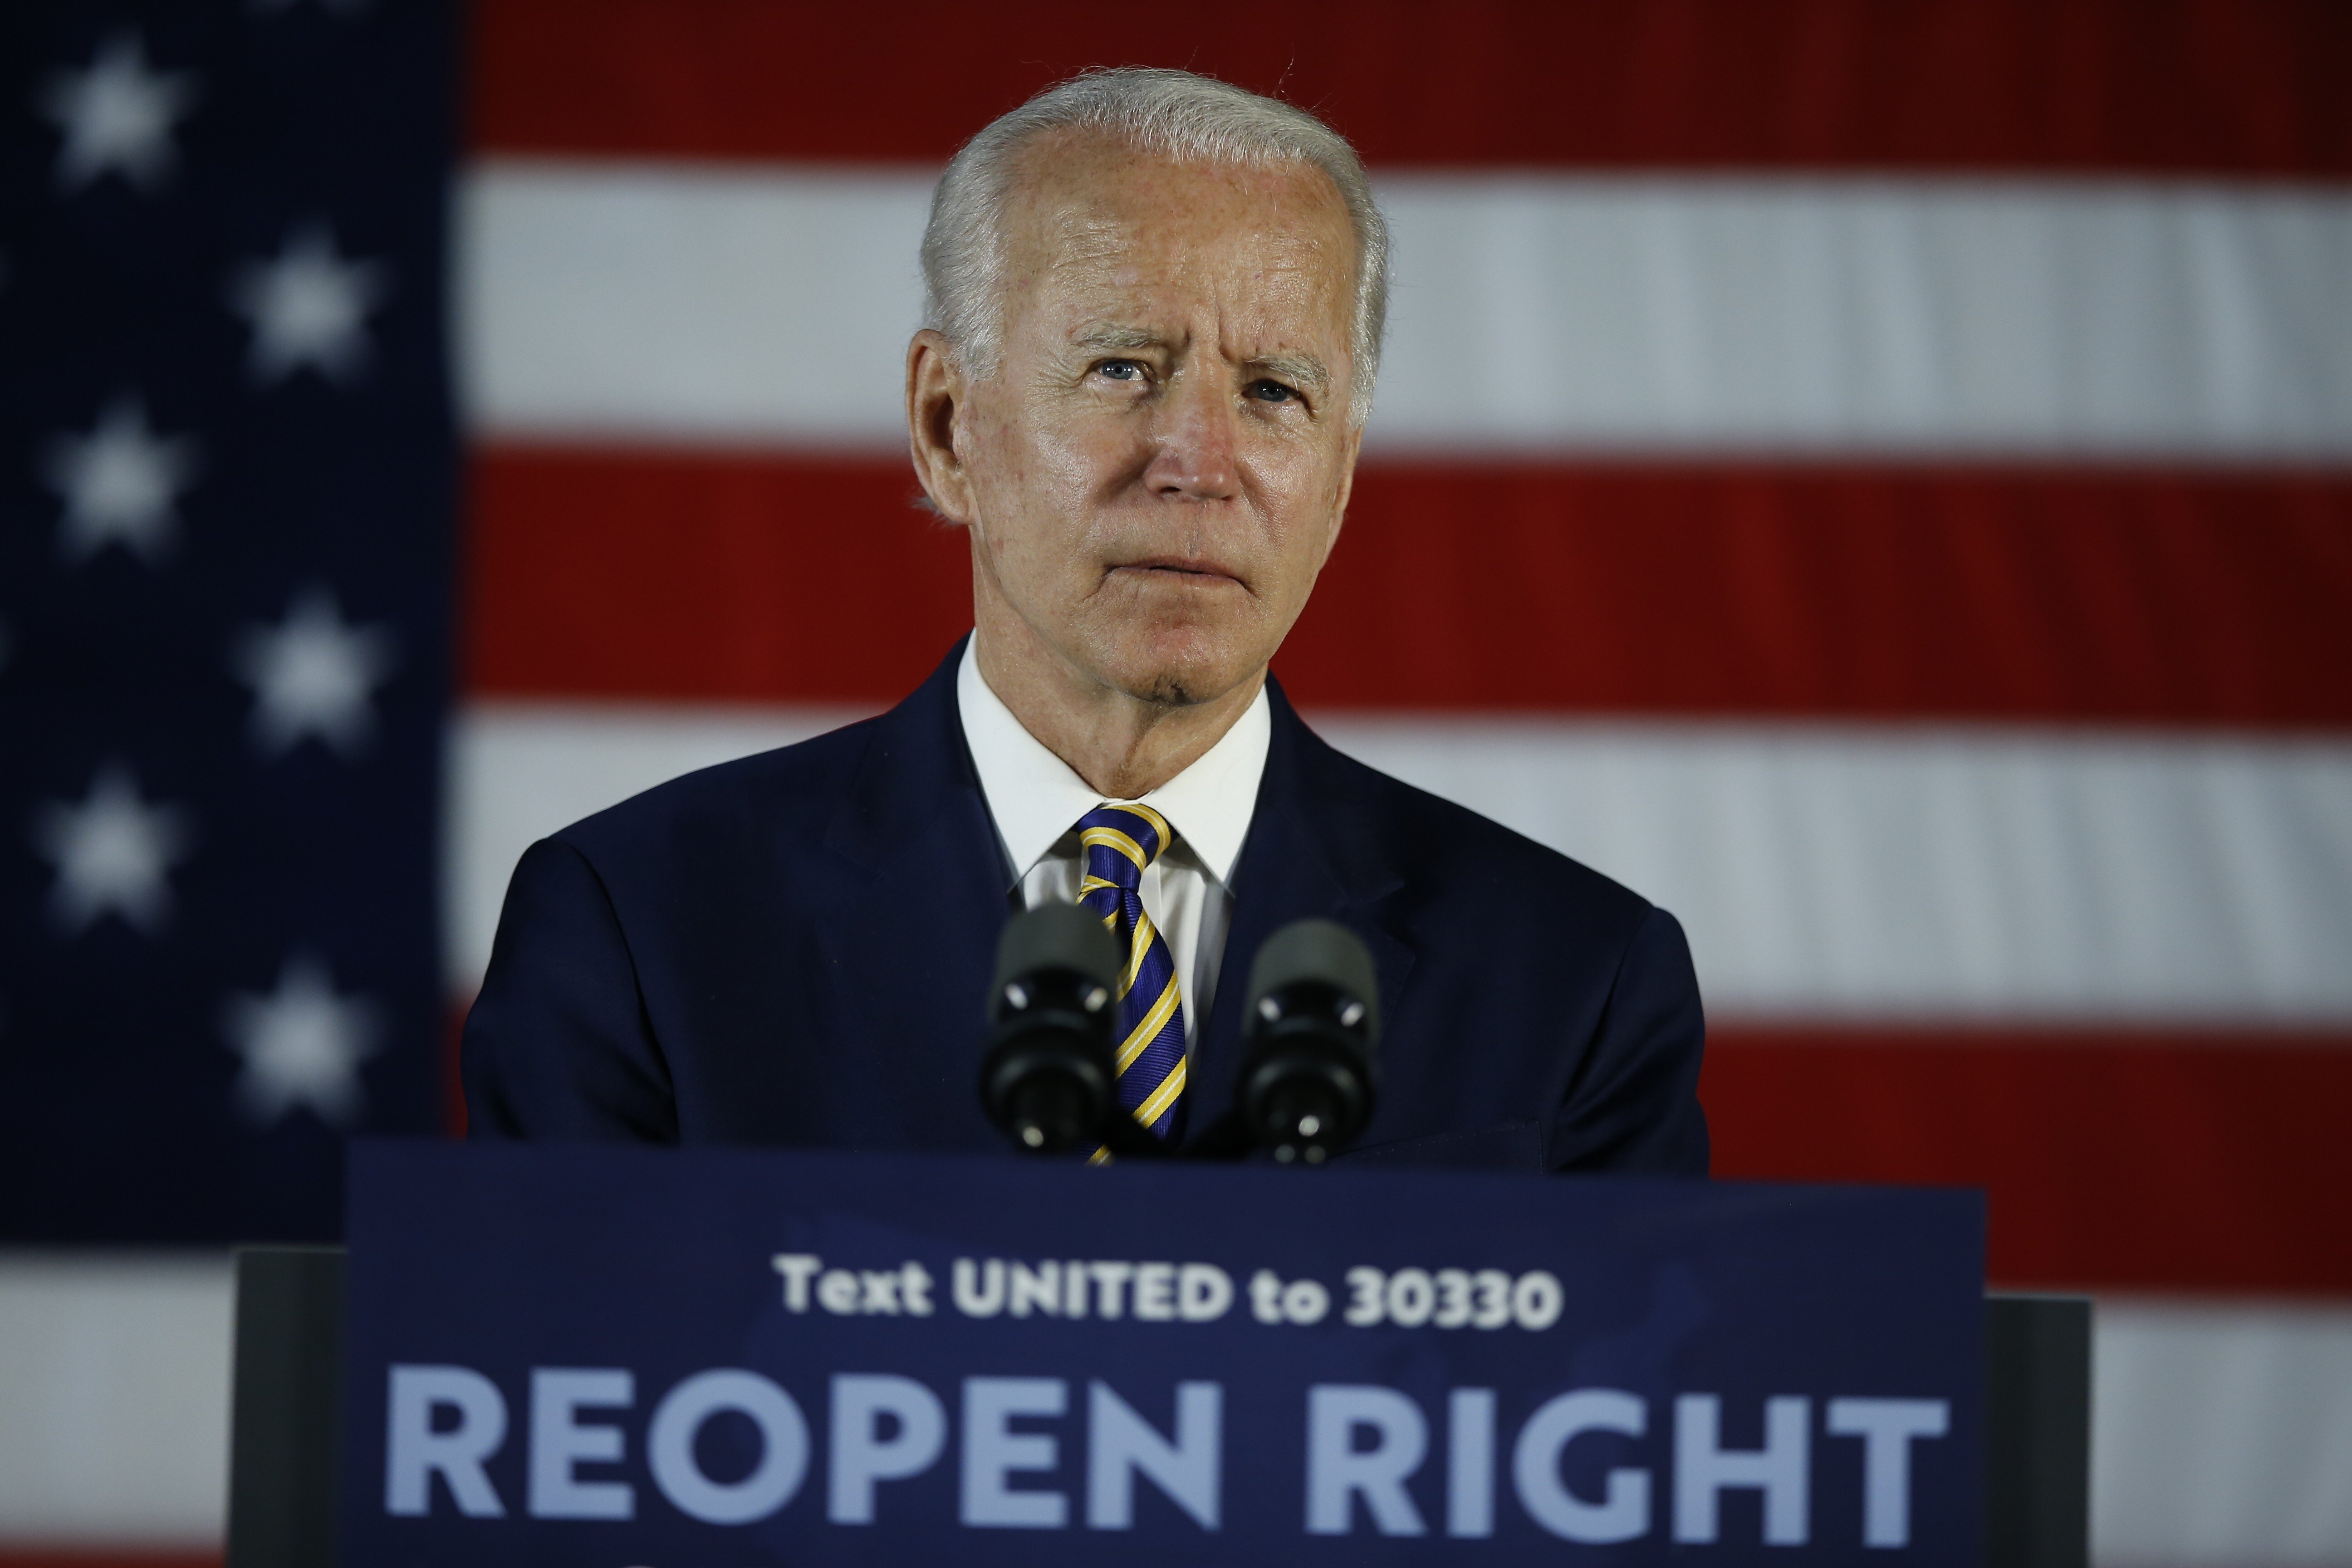 A lot could change between now and November, but current polls give Democratic presidential candidate Joe Biden a lead over US President Donald Trump. Photo: AP